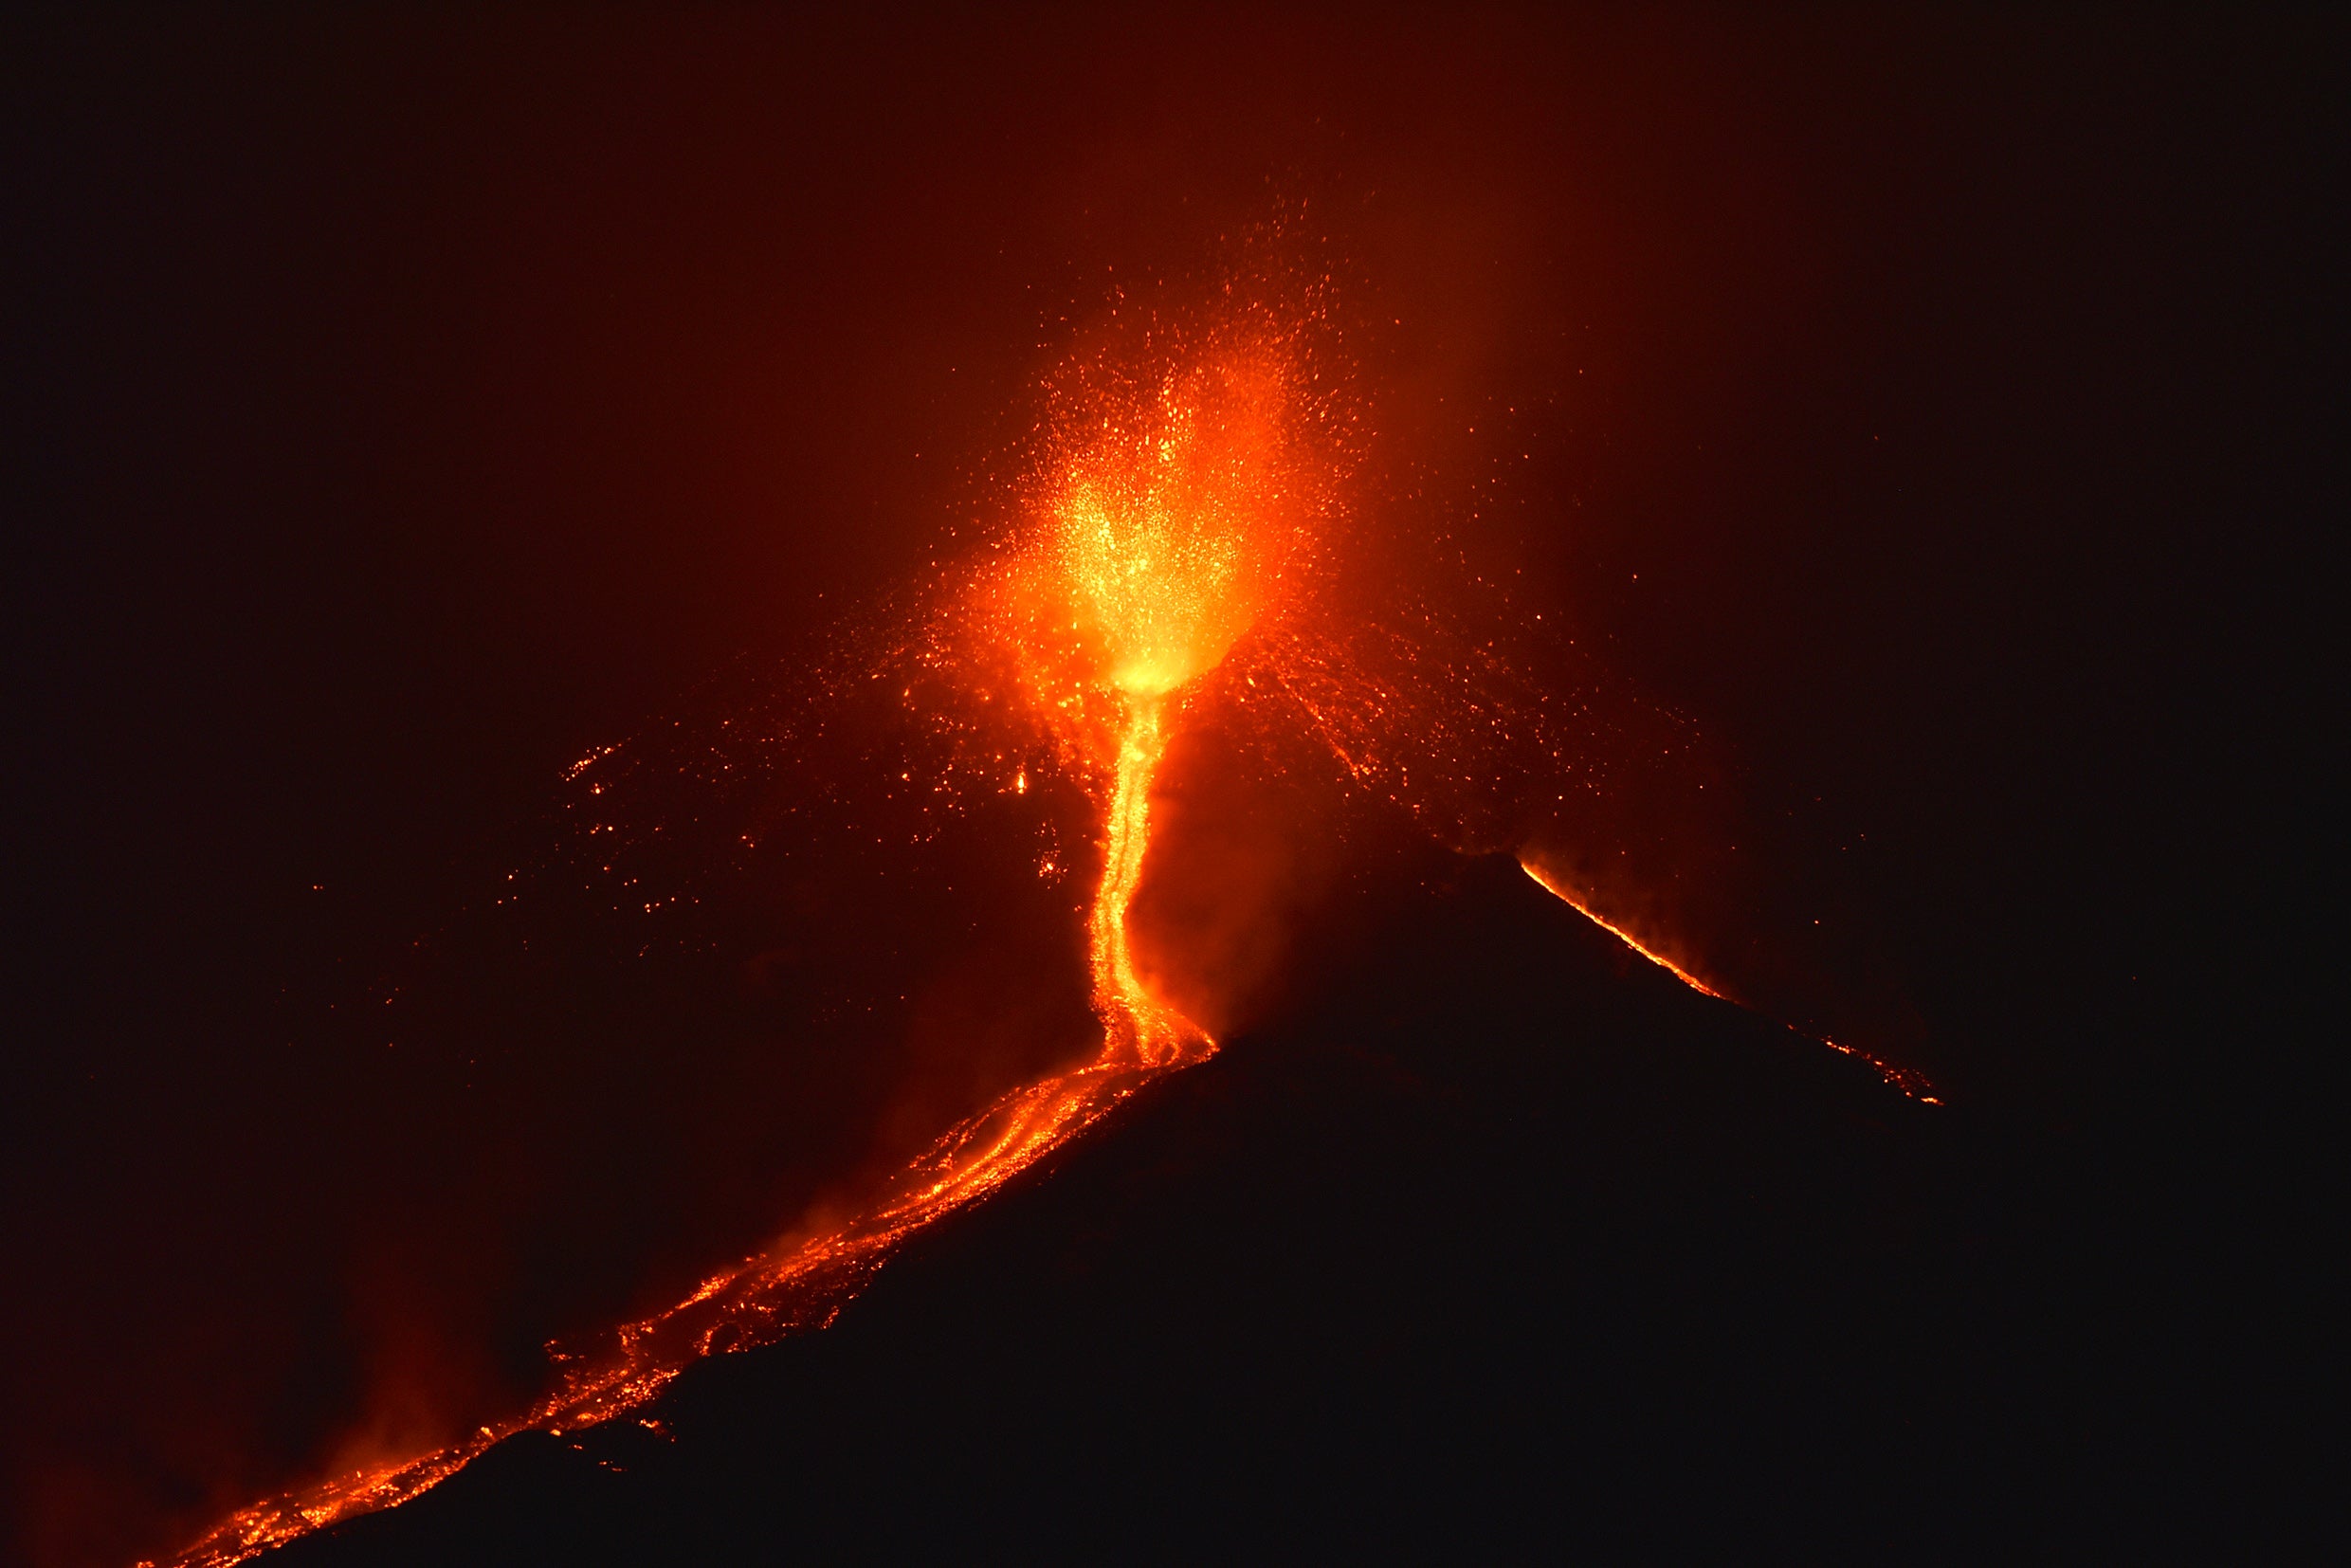 You won’t be able to get anywhere near Mt Etna when it’s erupting, as it did last December